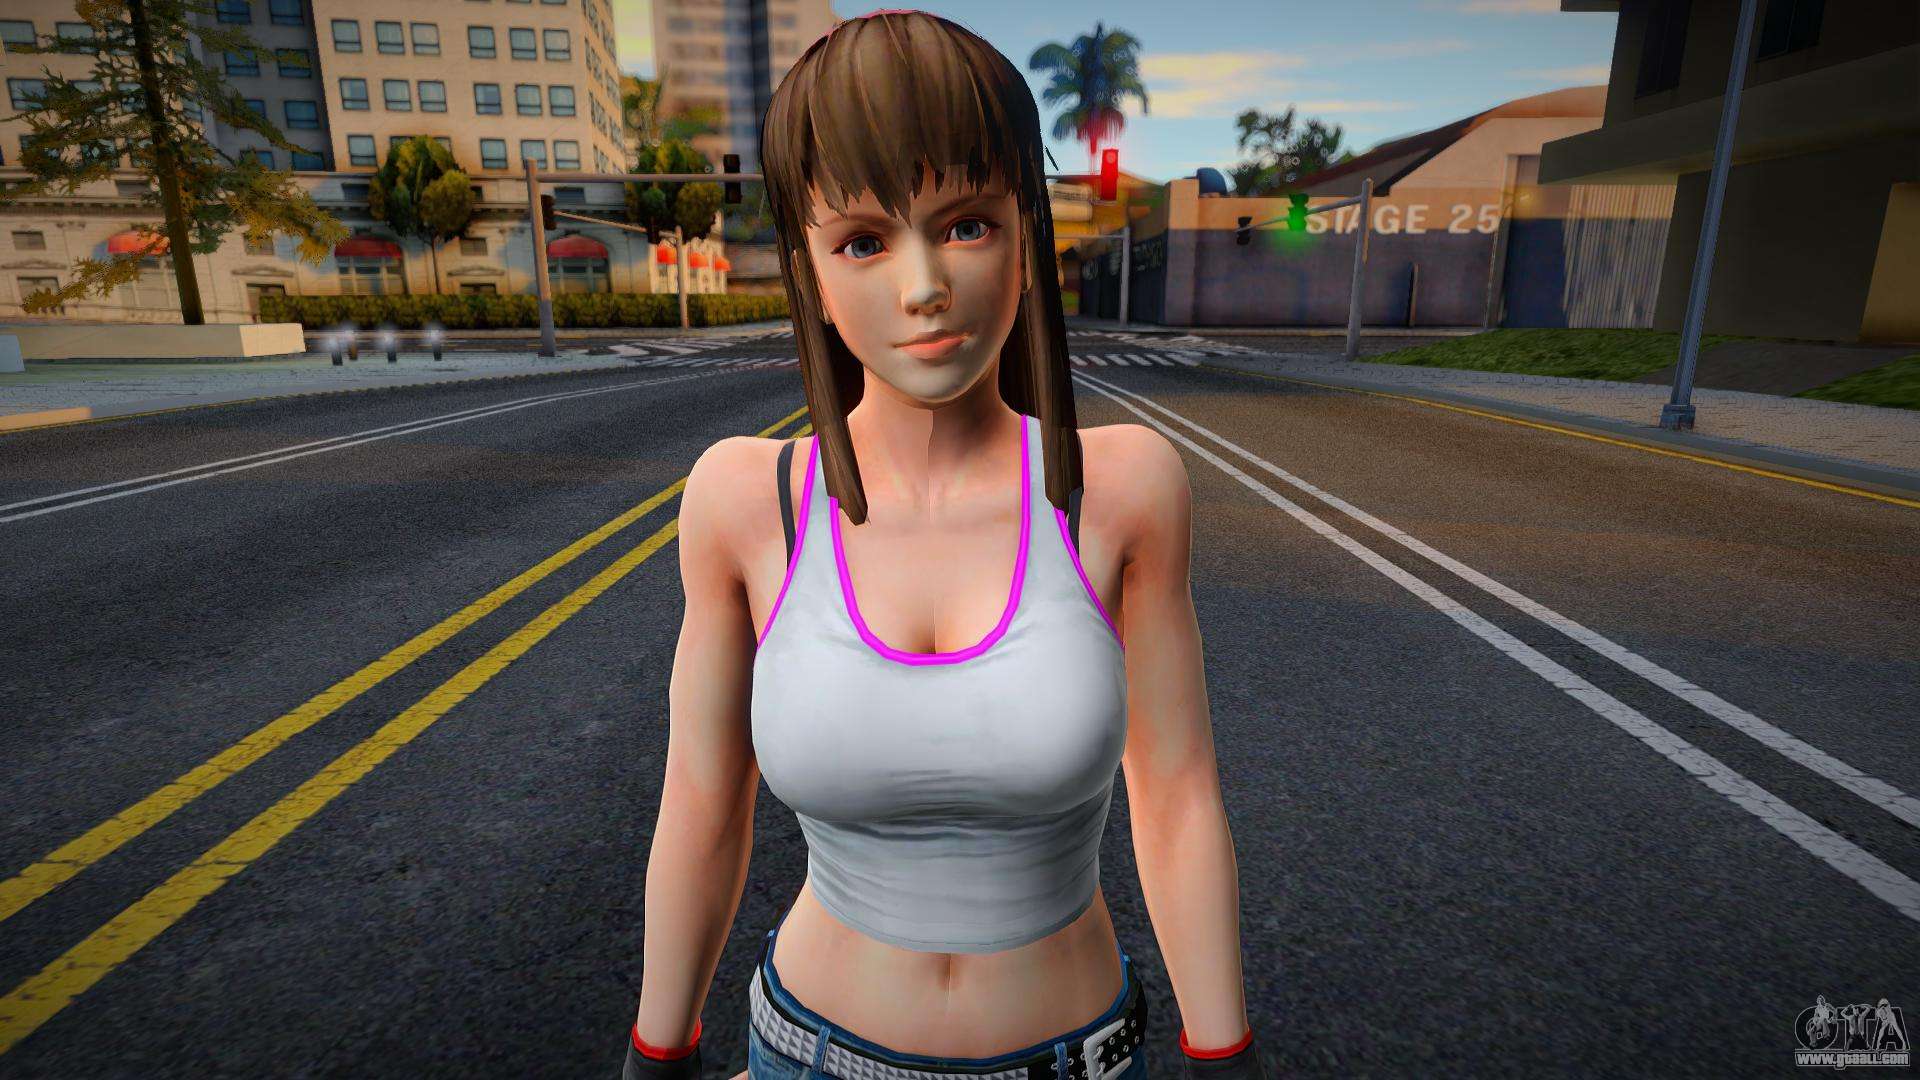 chris peightal recommends Hitomi Dead Or Alive 5